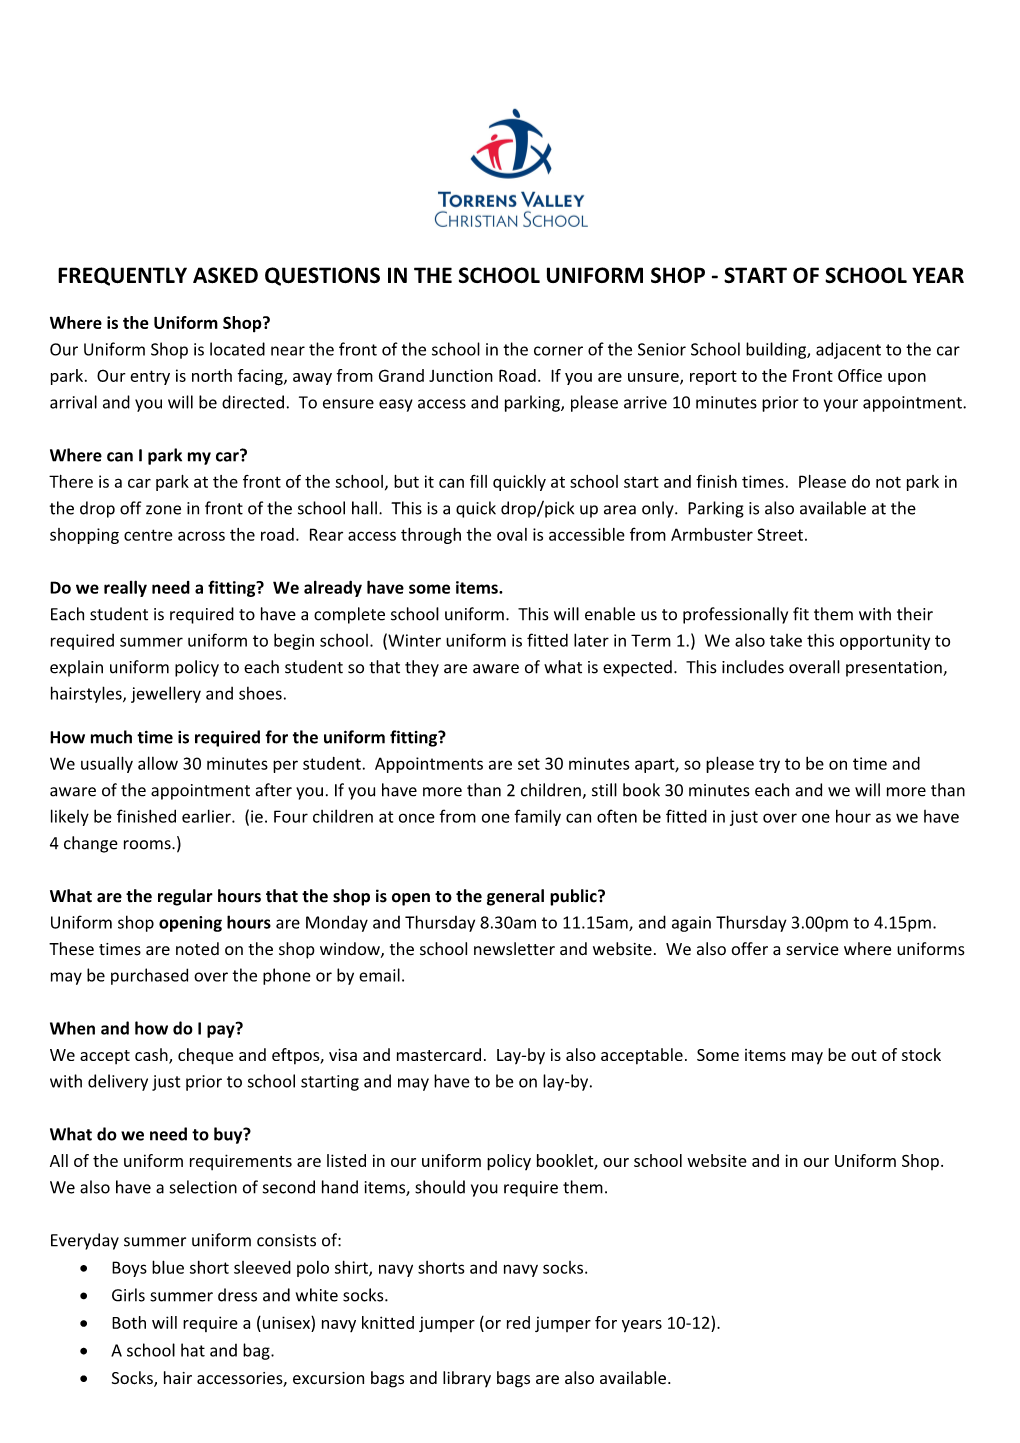 Frequently Asked Questions in the School Uniform Shop - Start of School Year